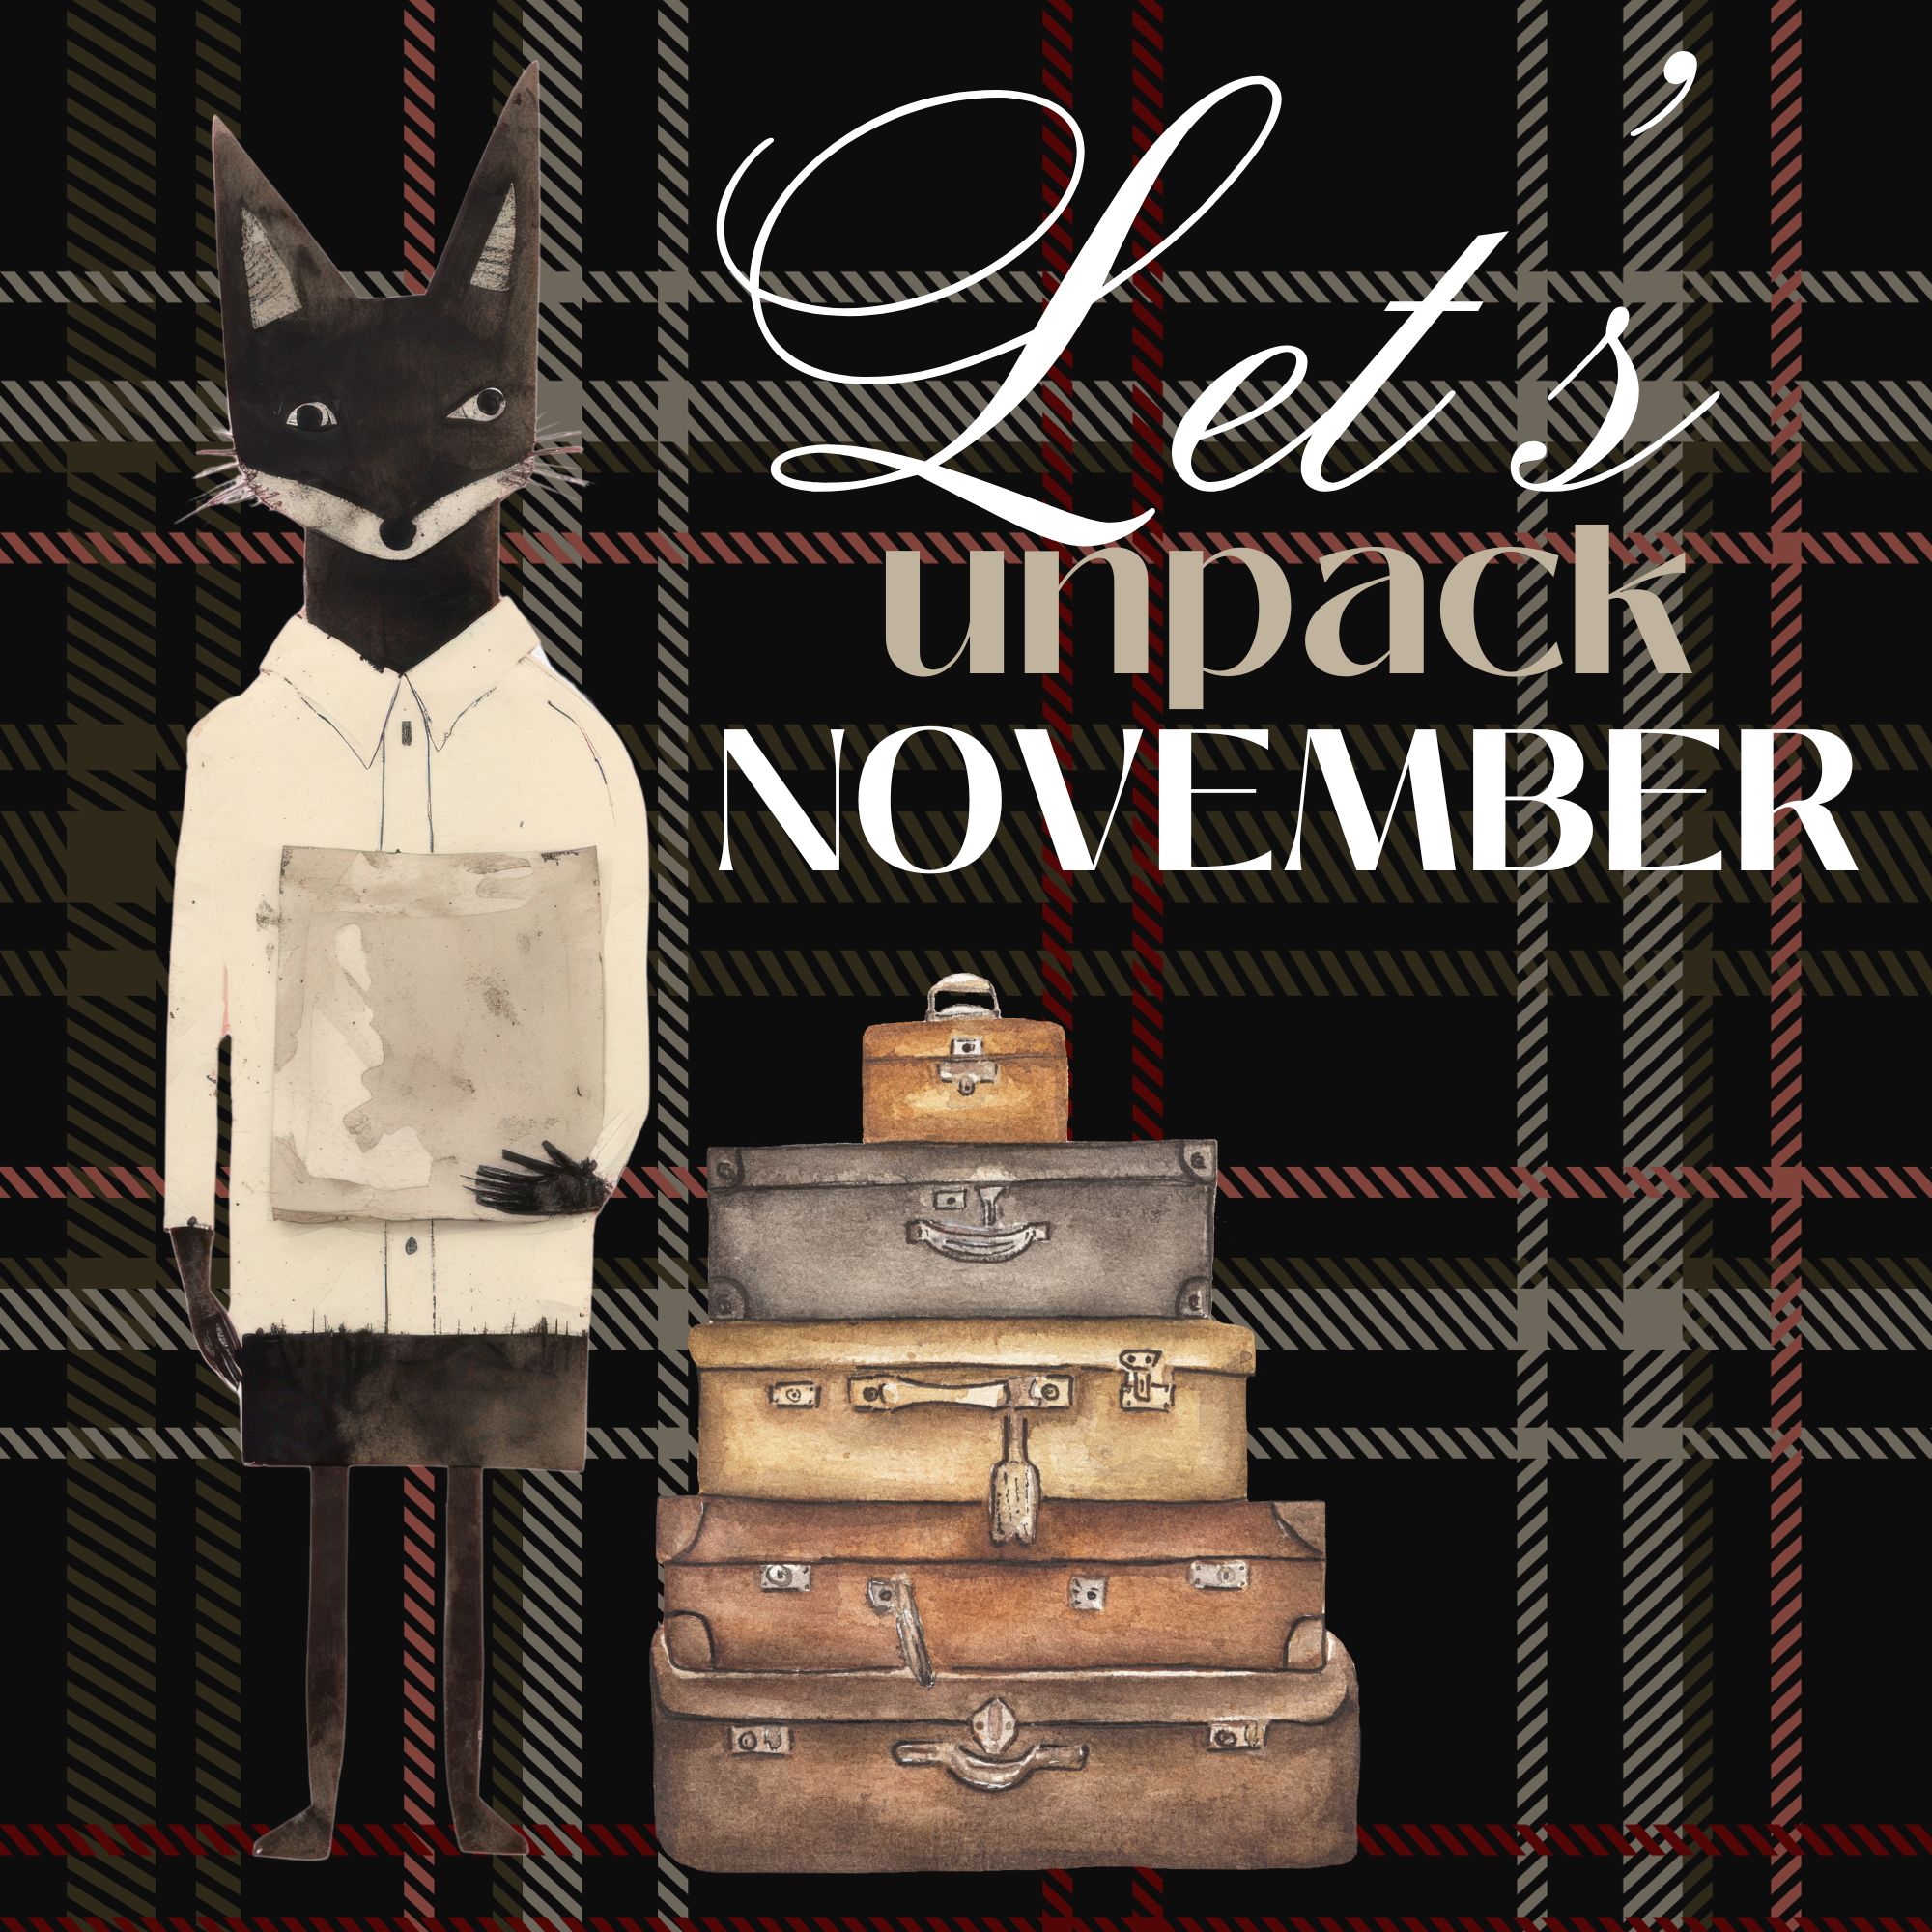 It’s A Wrap! Time To Unpack The Month of November!